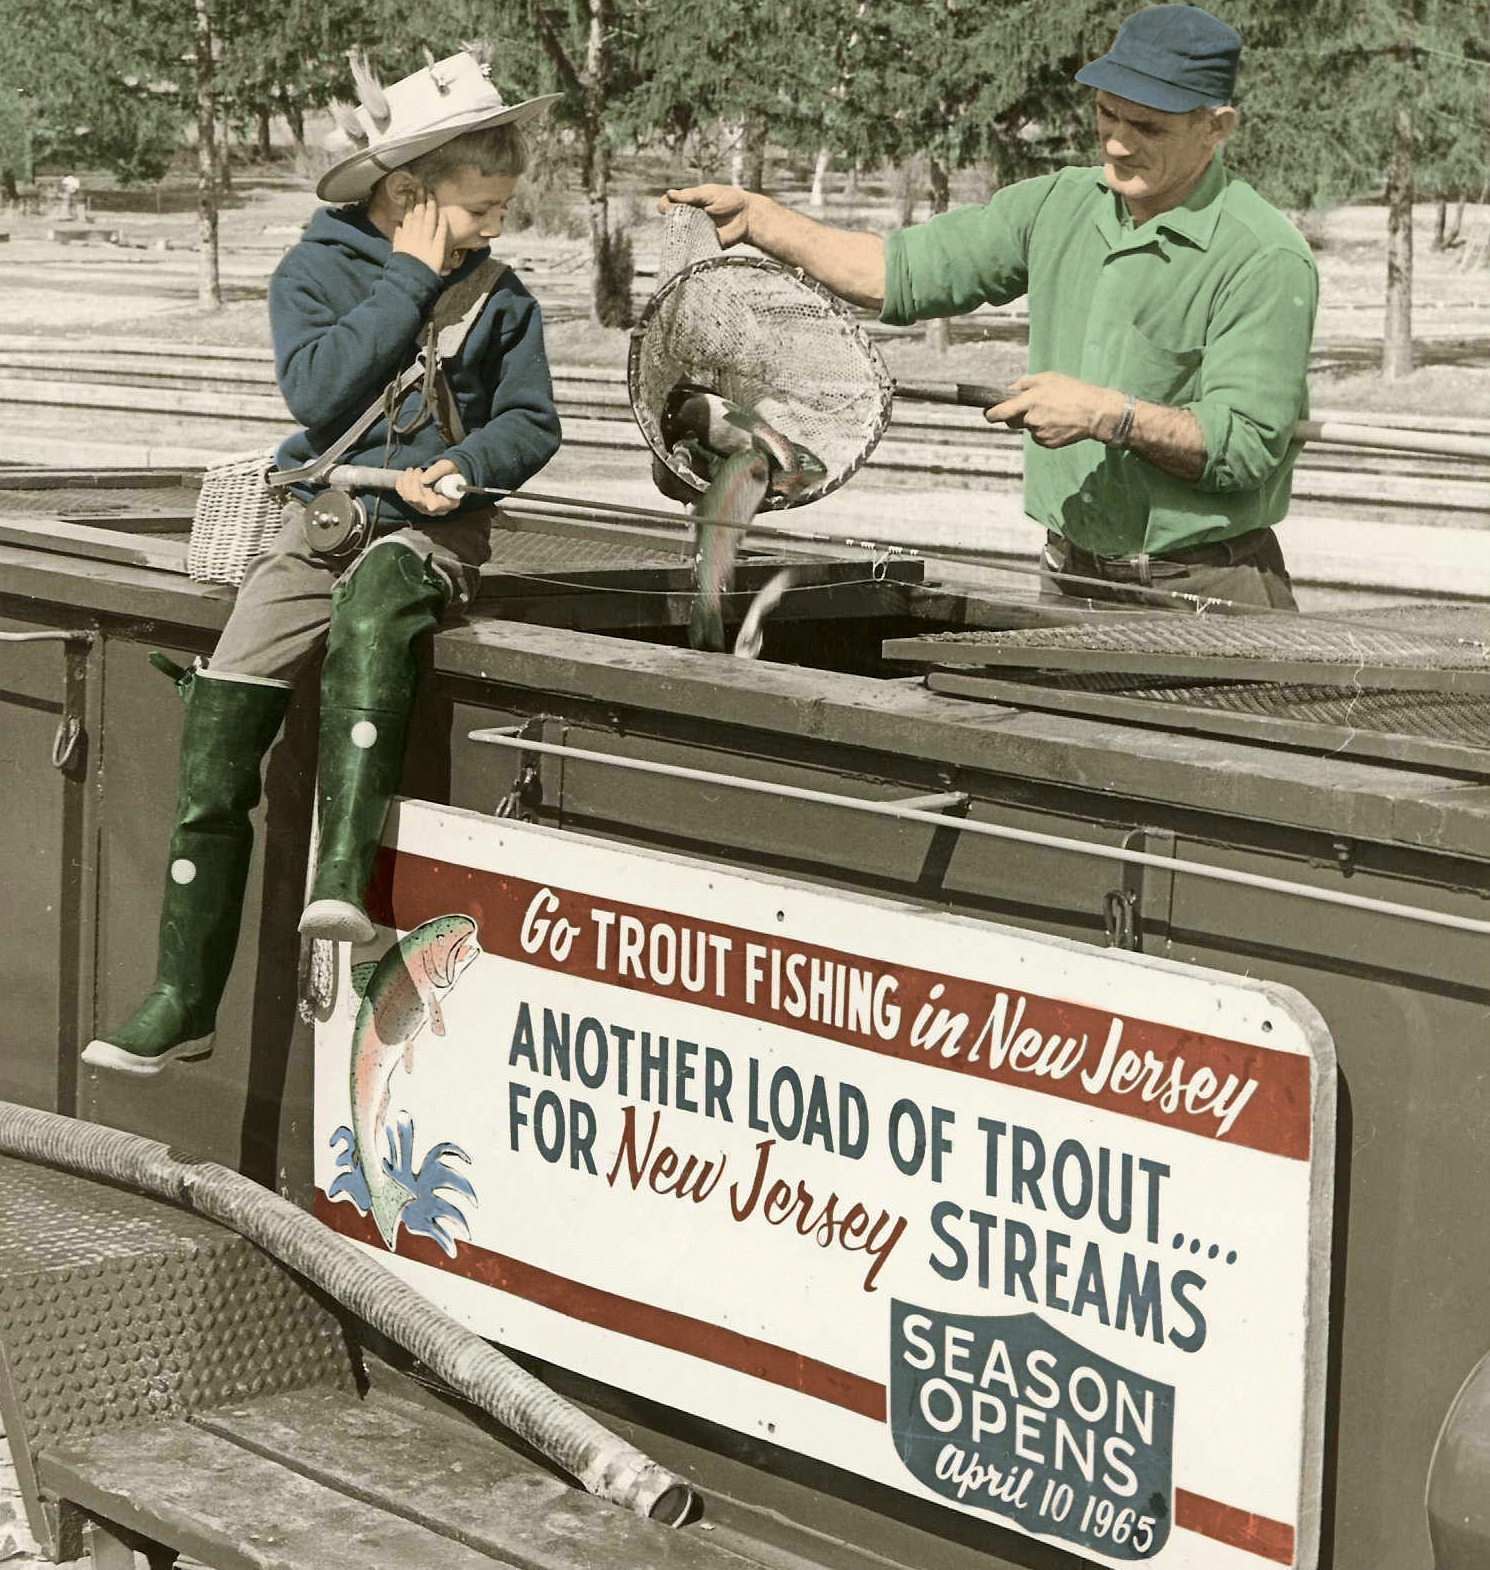 Photo of Man and Child with Trout Stocking Truck from 1965